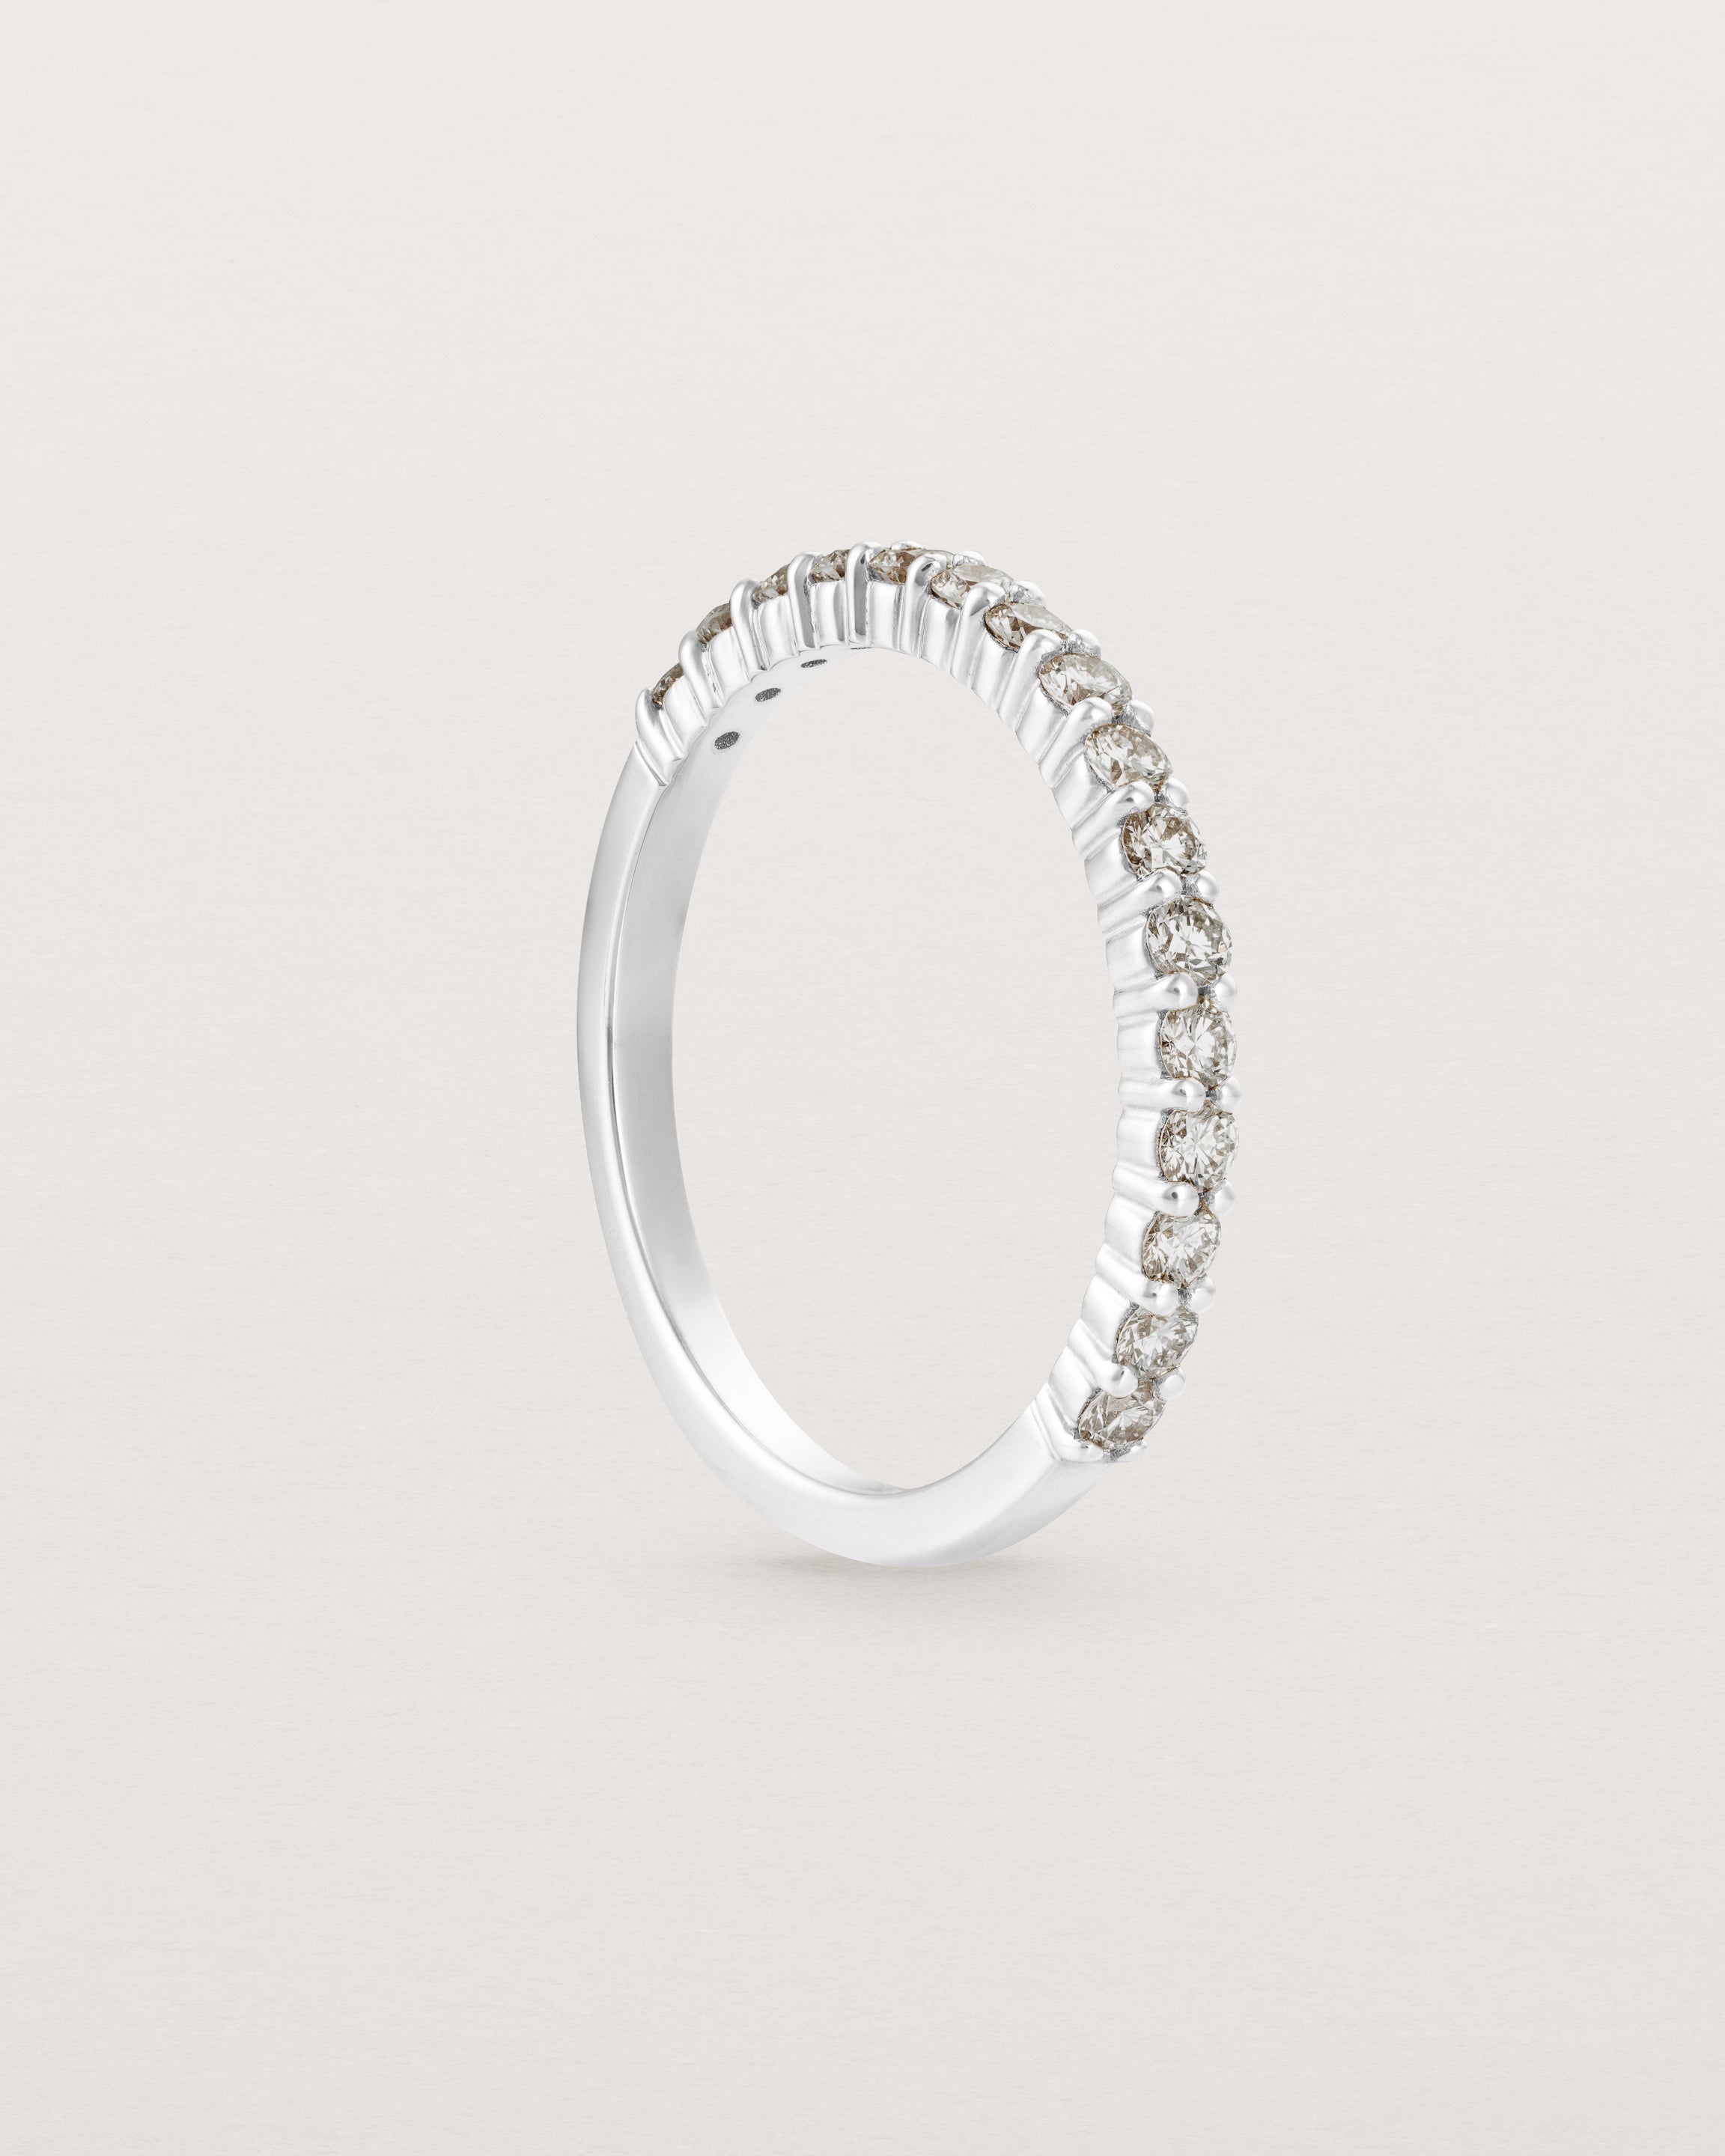 Standing view of the Demi Grace Ring | Champagne Diamonds in white gold.